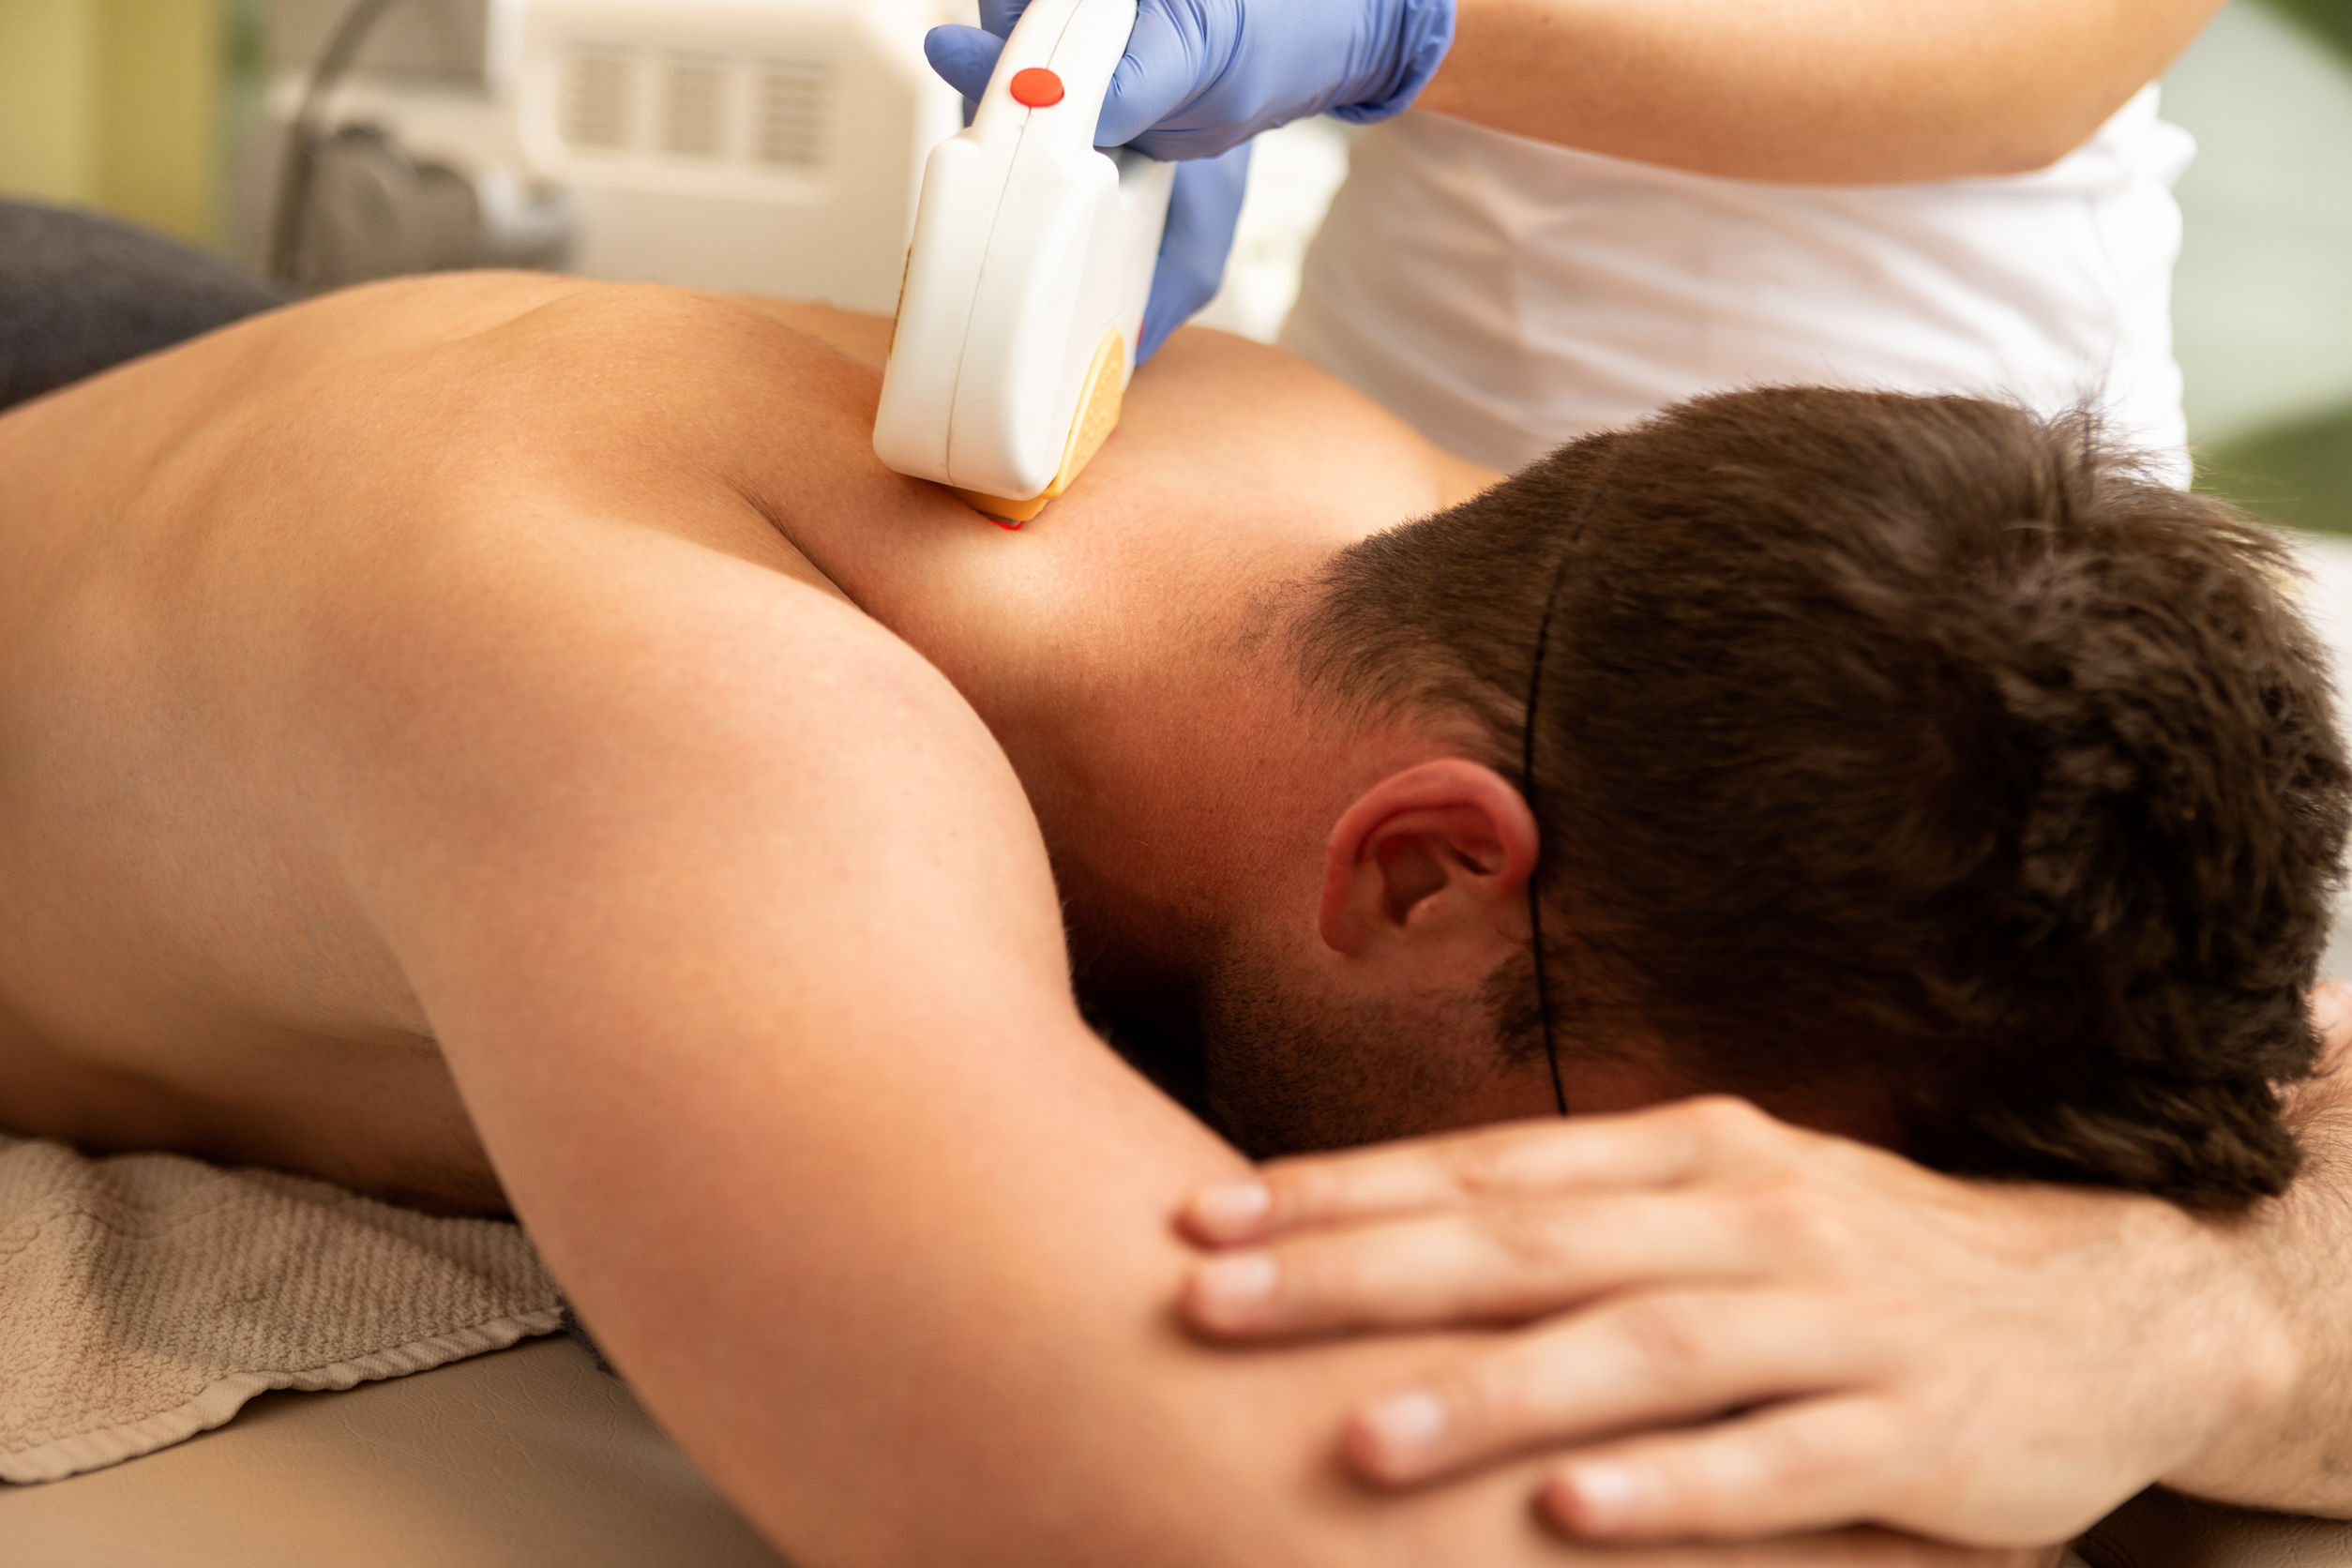 Laser hair removal on the shoulders and back is a popular option for men.